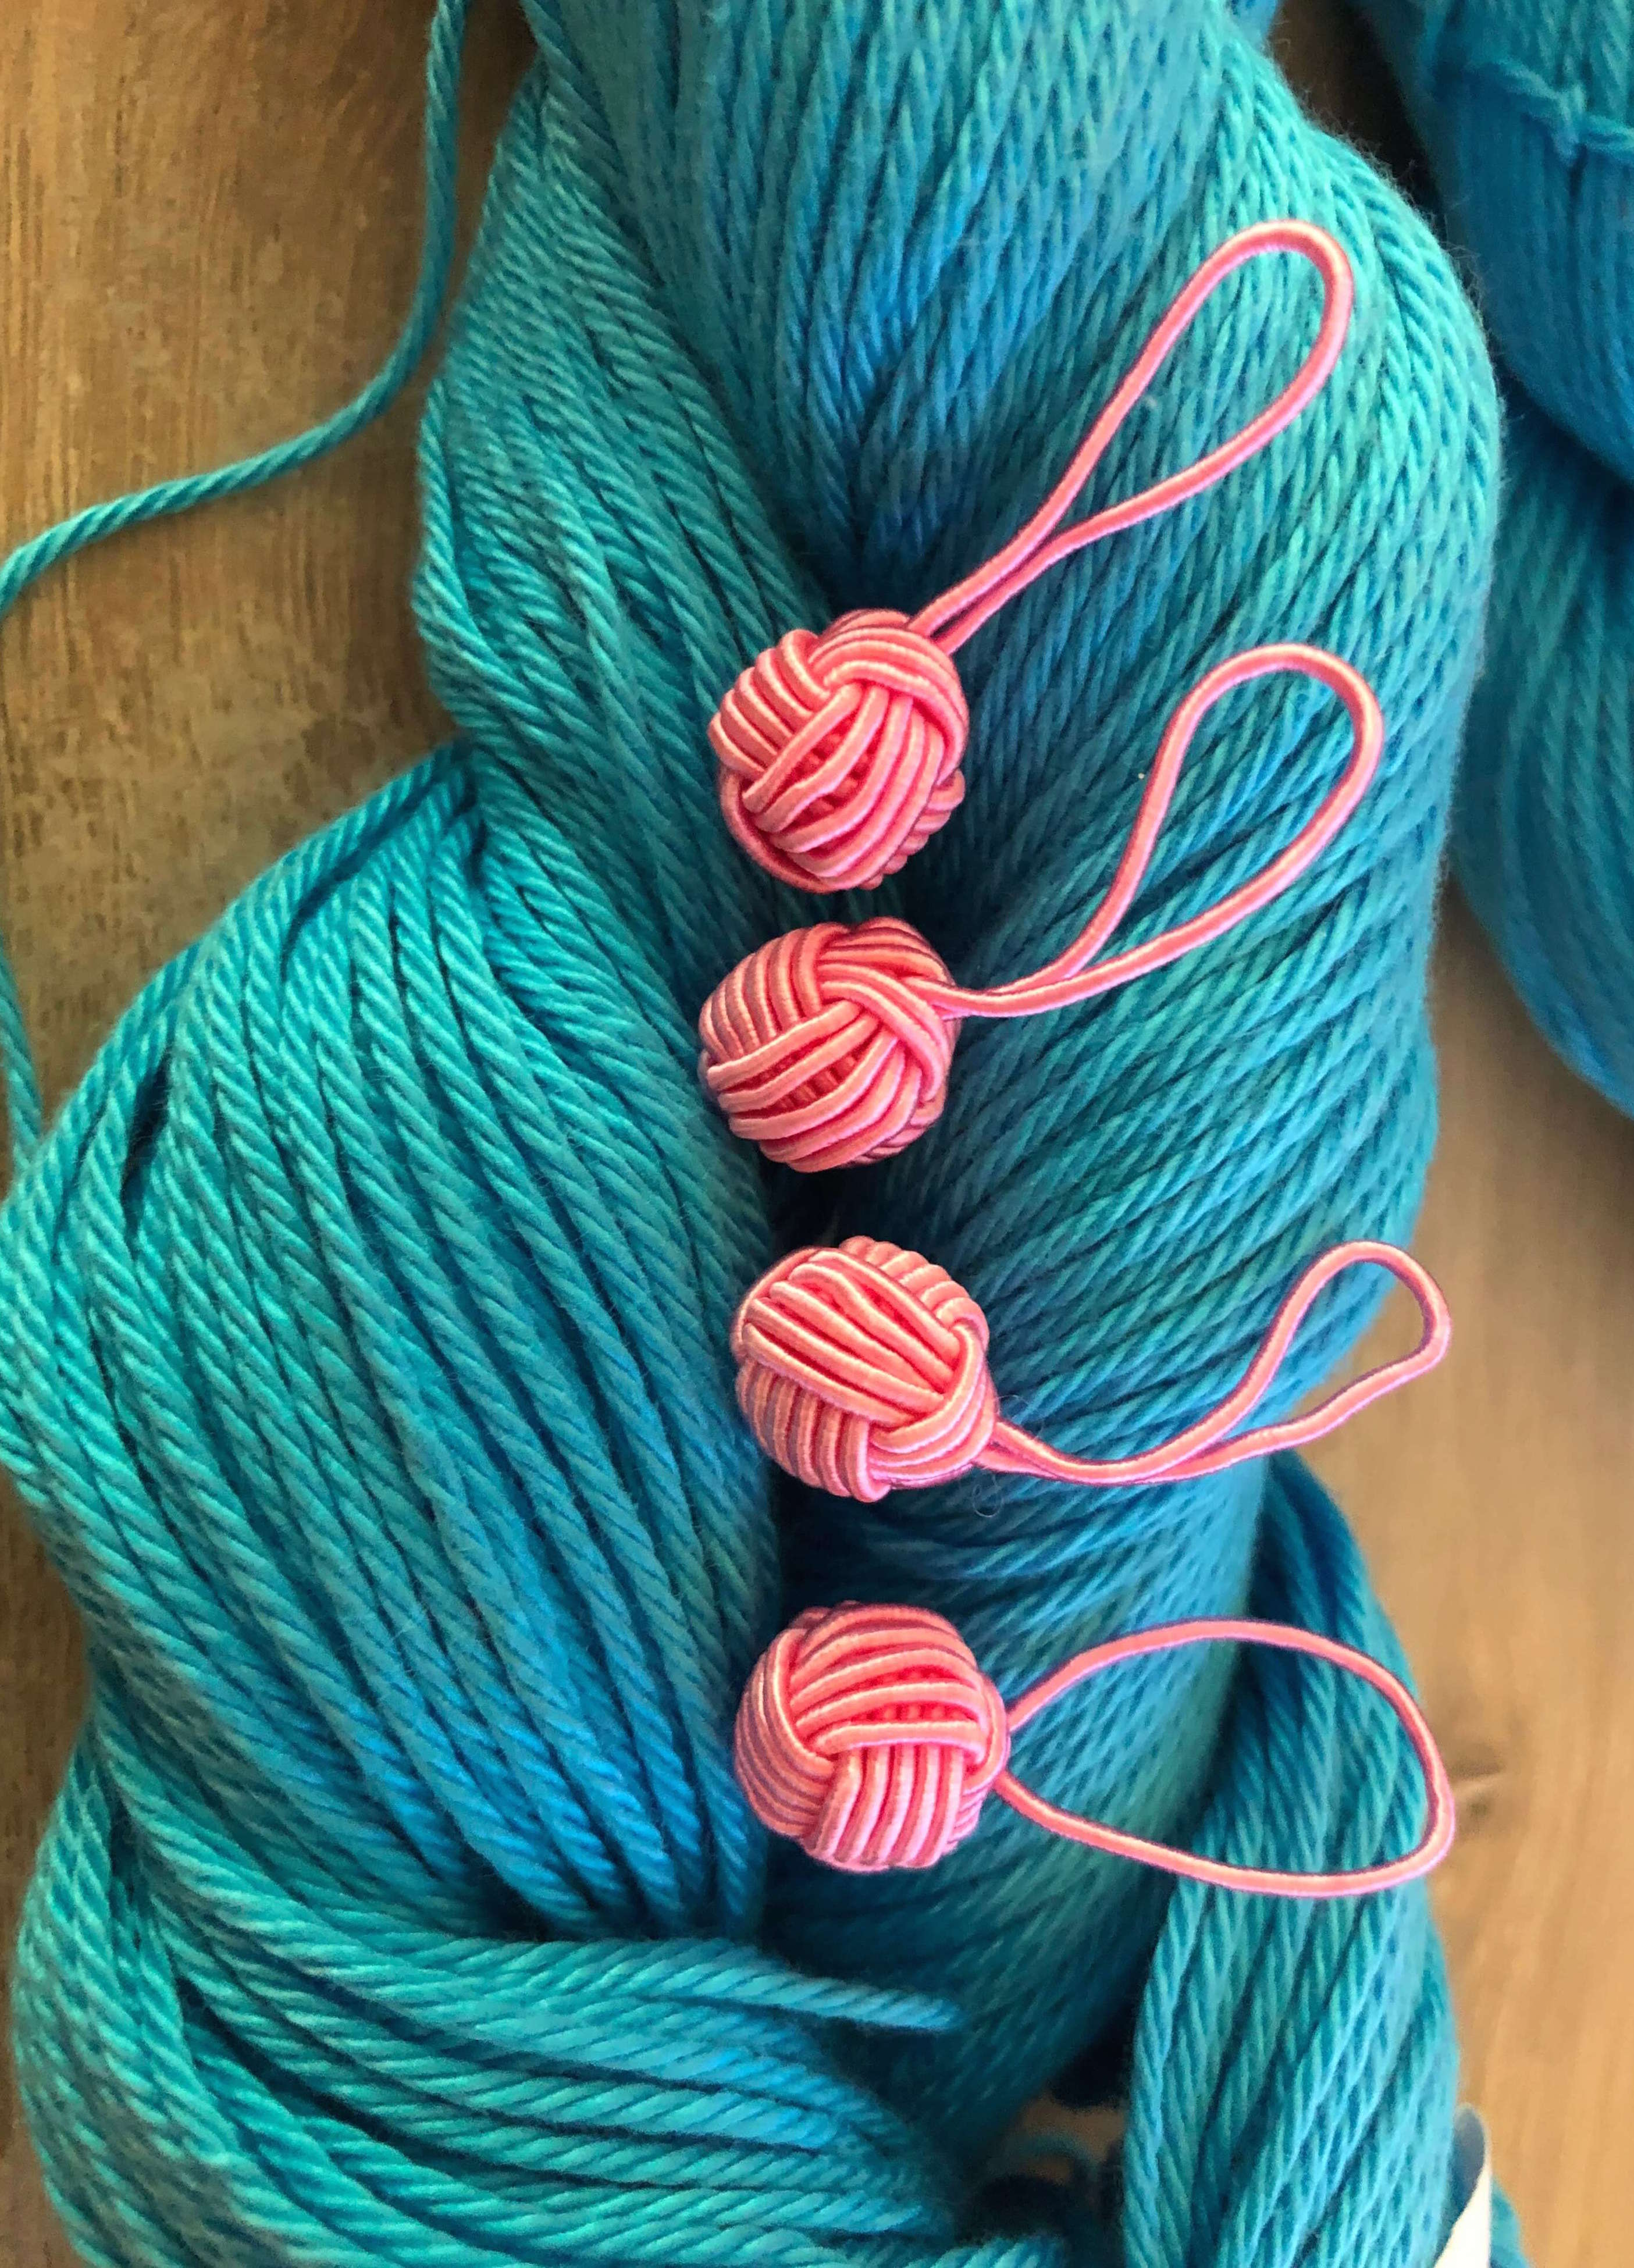 four yarn ball-shaped stitch markers lined up on a skein of yarn